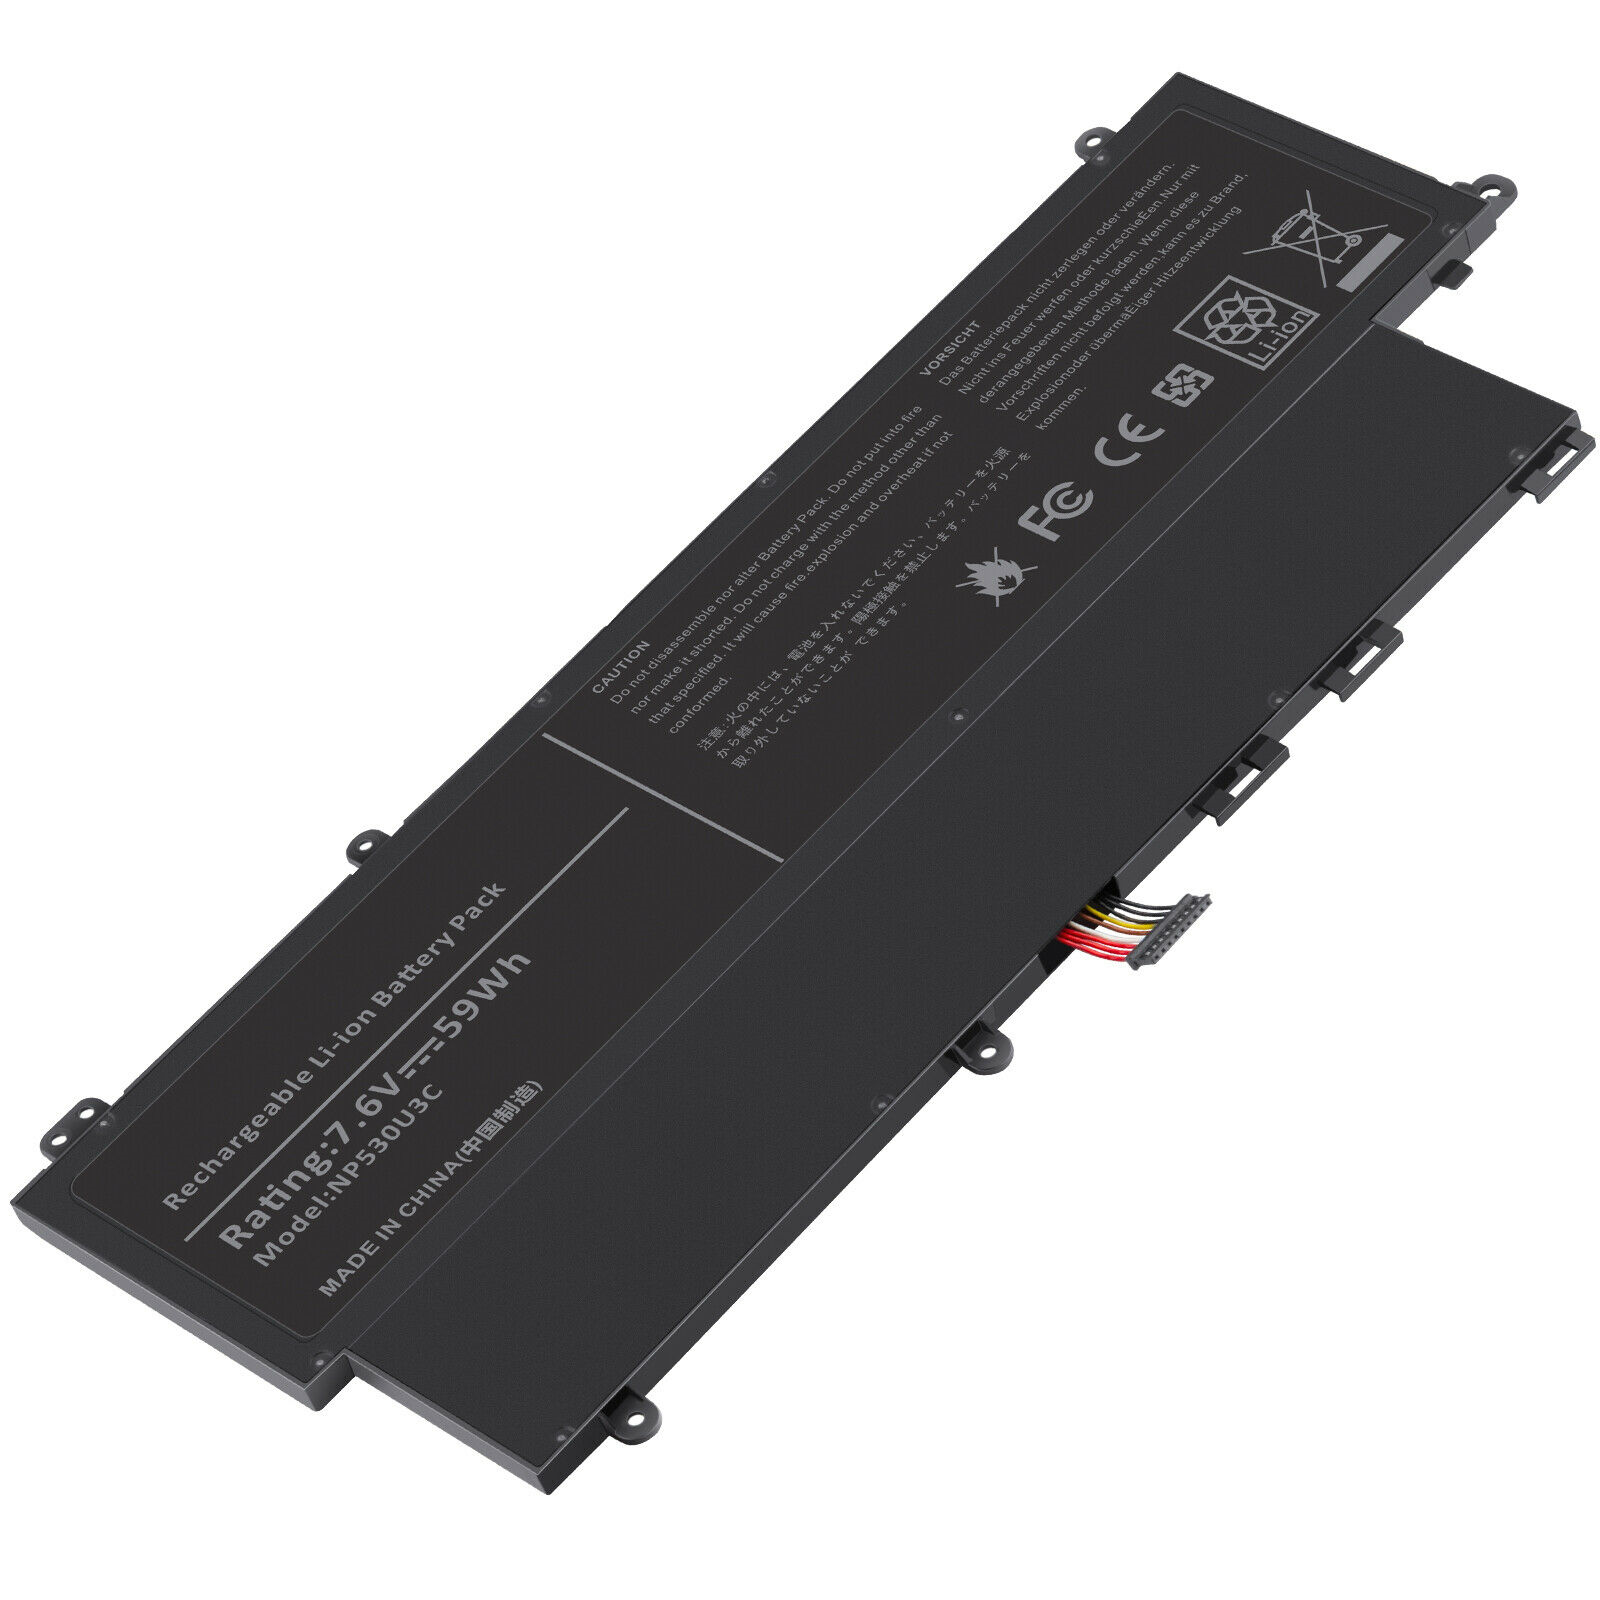 Samsung NP530U4B-S01AE Replacement Battery